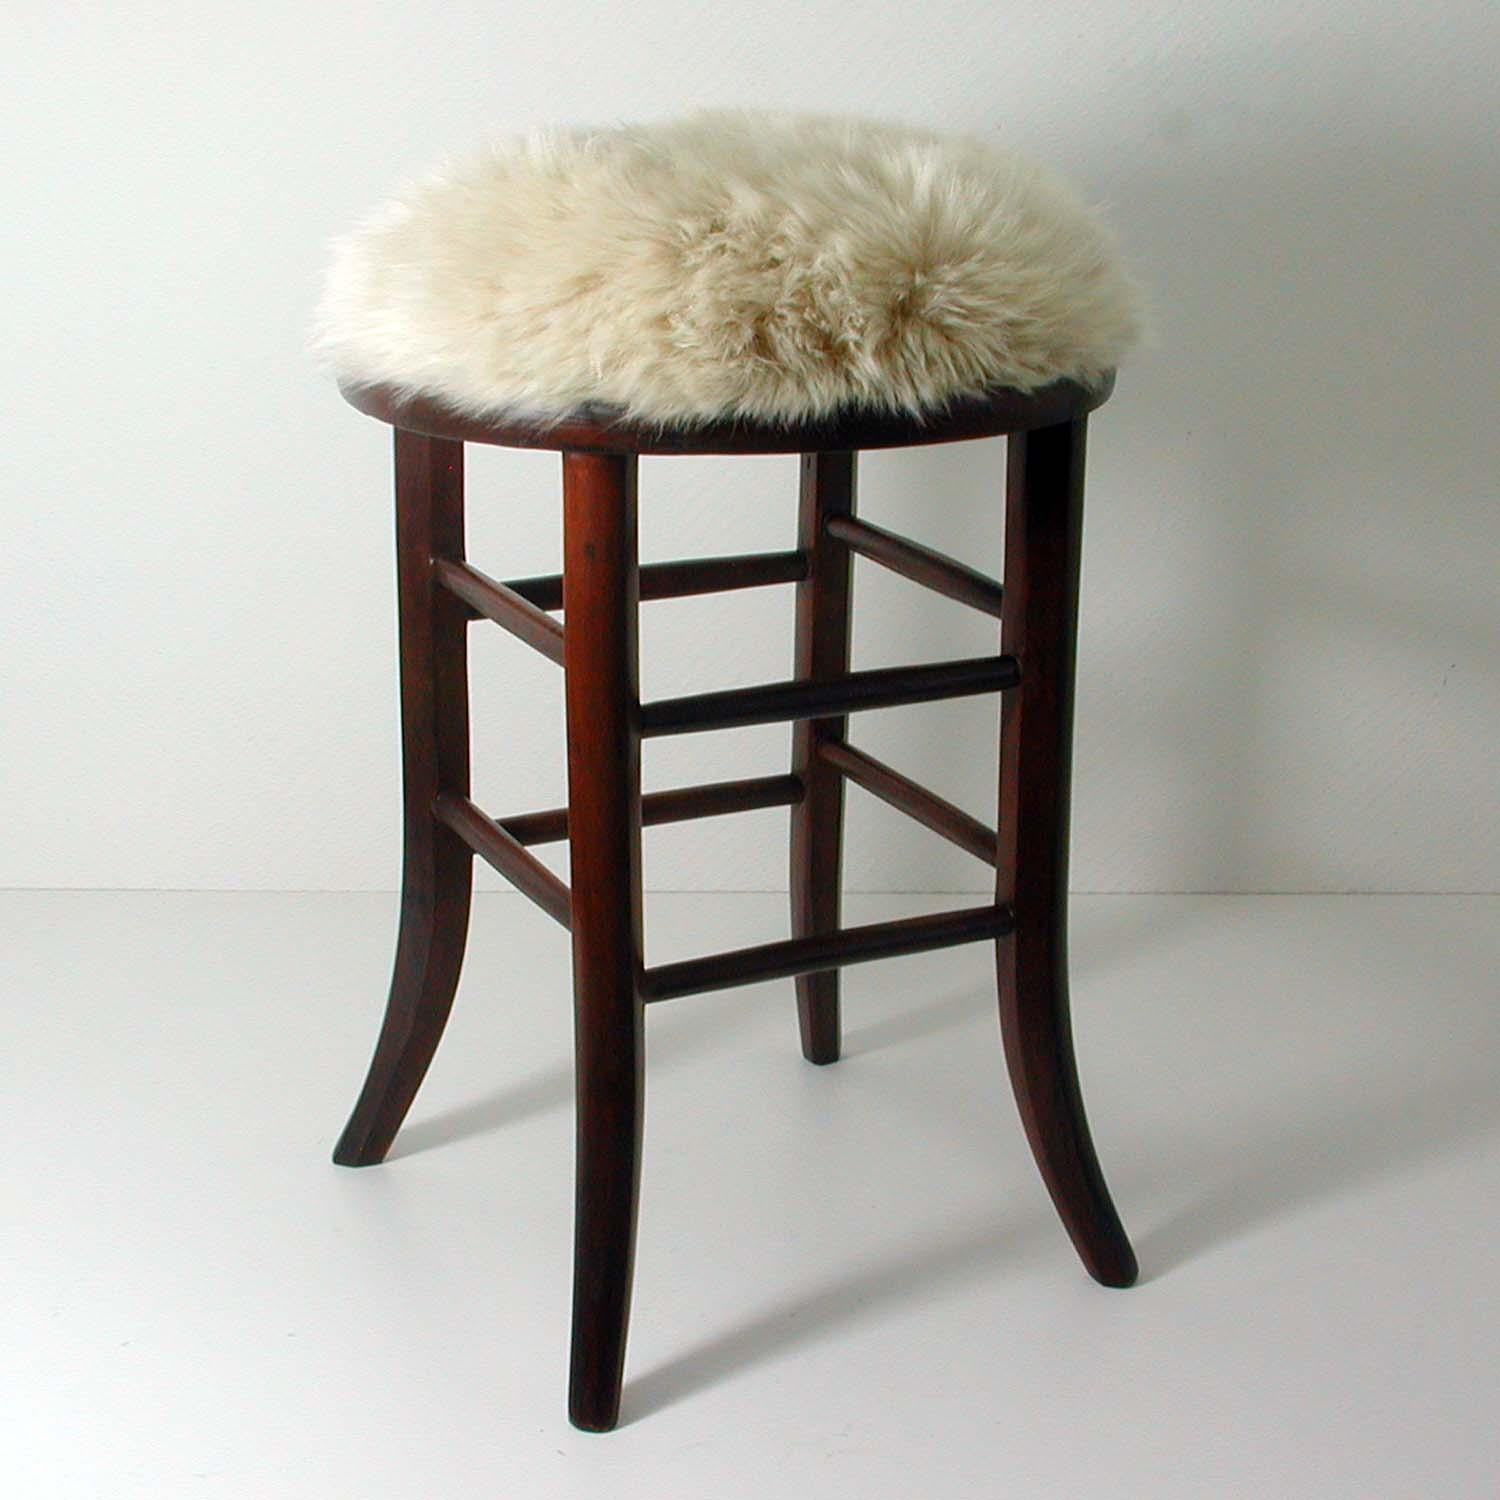 This 20th century stool was manufactured in Austria in the 1940s. The stool has got a walnut base and a cream colored real Iceland lamb fur seat. 

It has been completely restored: the wooden legs abraded and re-lacquered, the seat upholstered